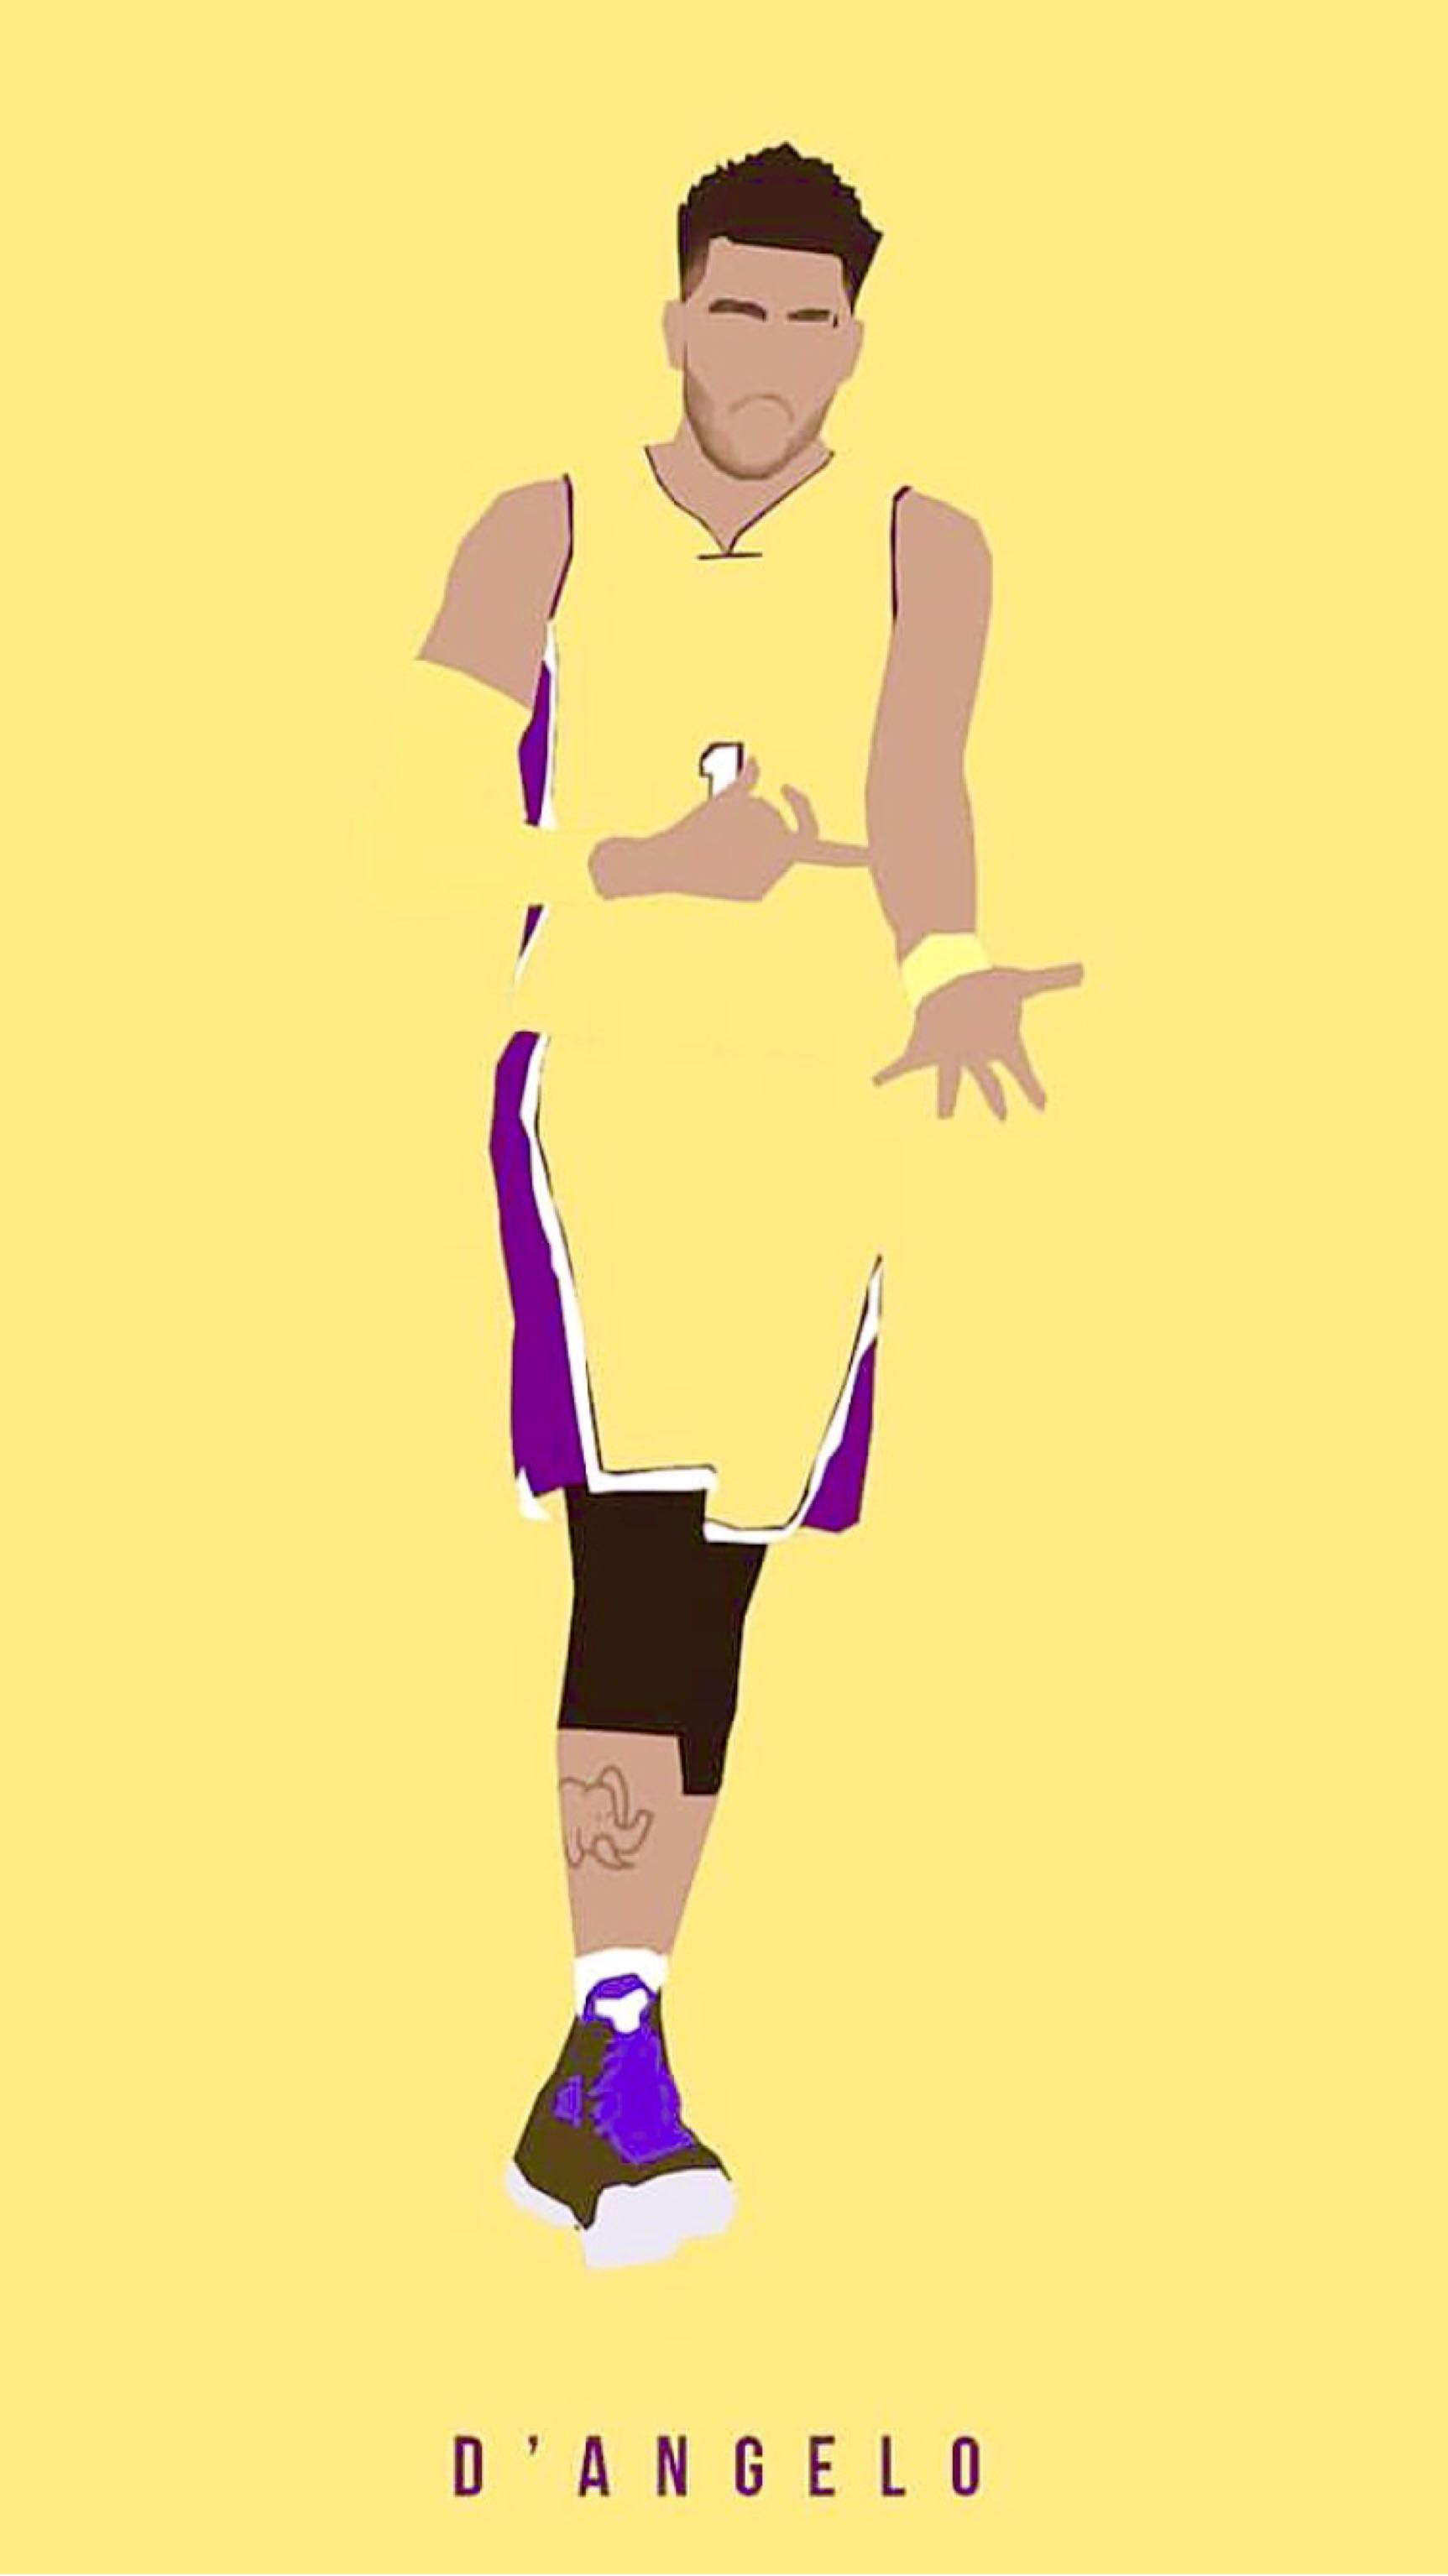 D'Angelo Russell // Ice in my veins DF . 20/03/2019  Nba wallpapers,  D'angelo russell wallpaper, Nba mvp